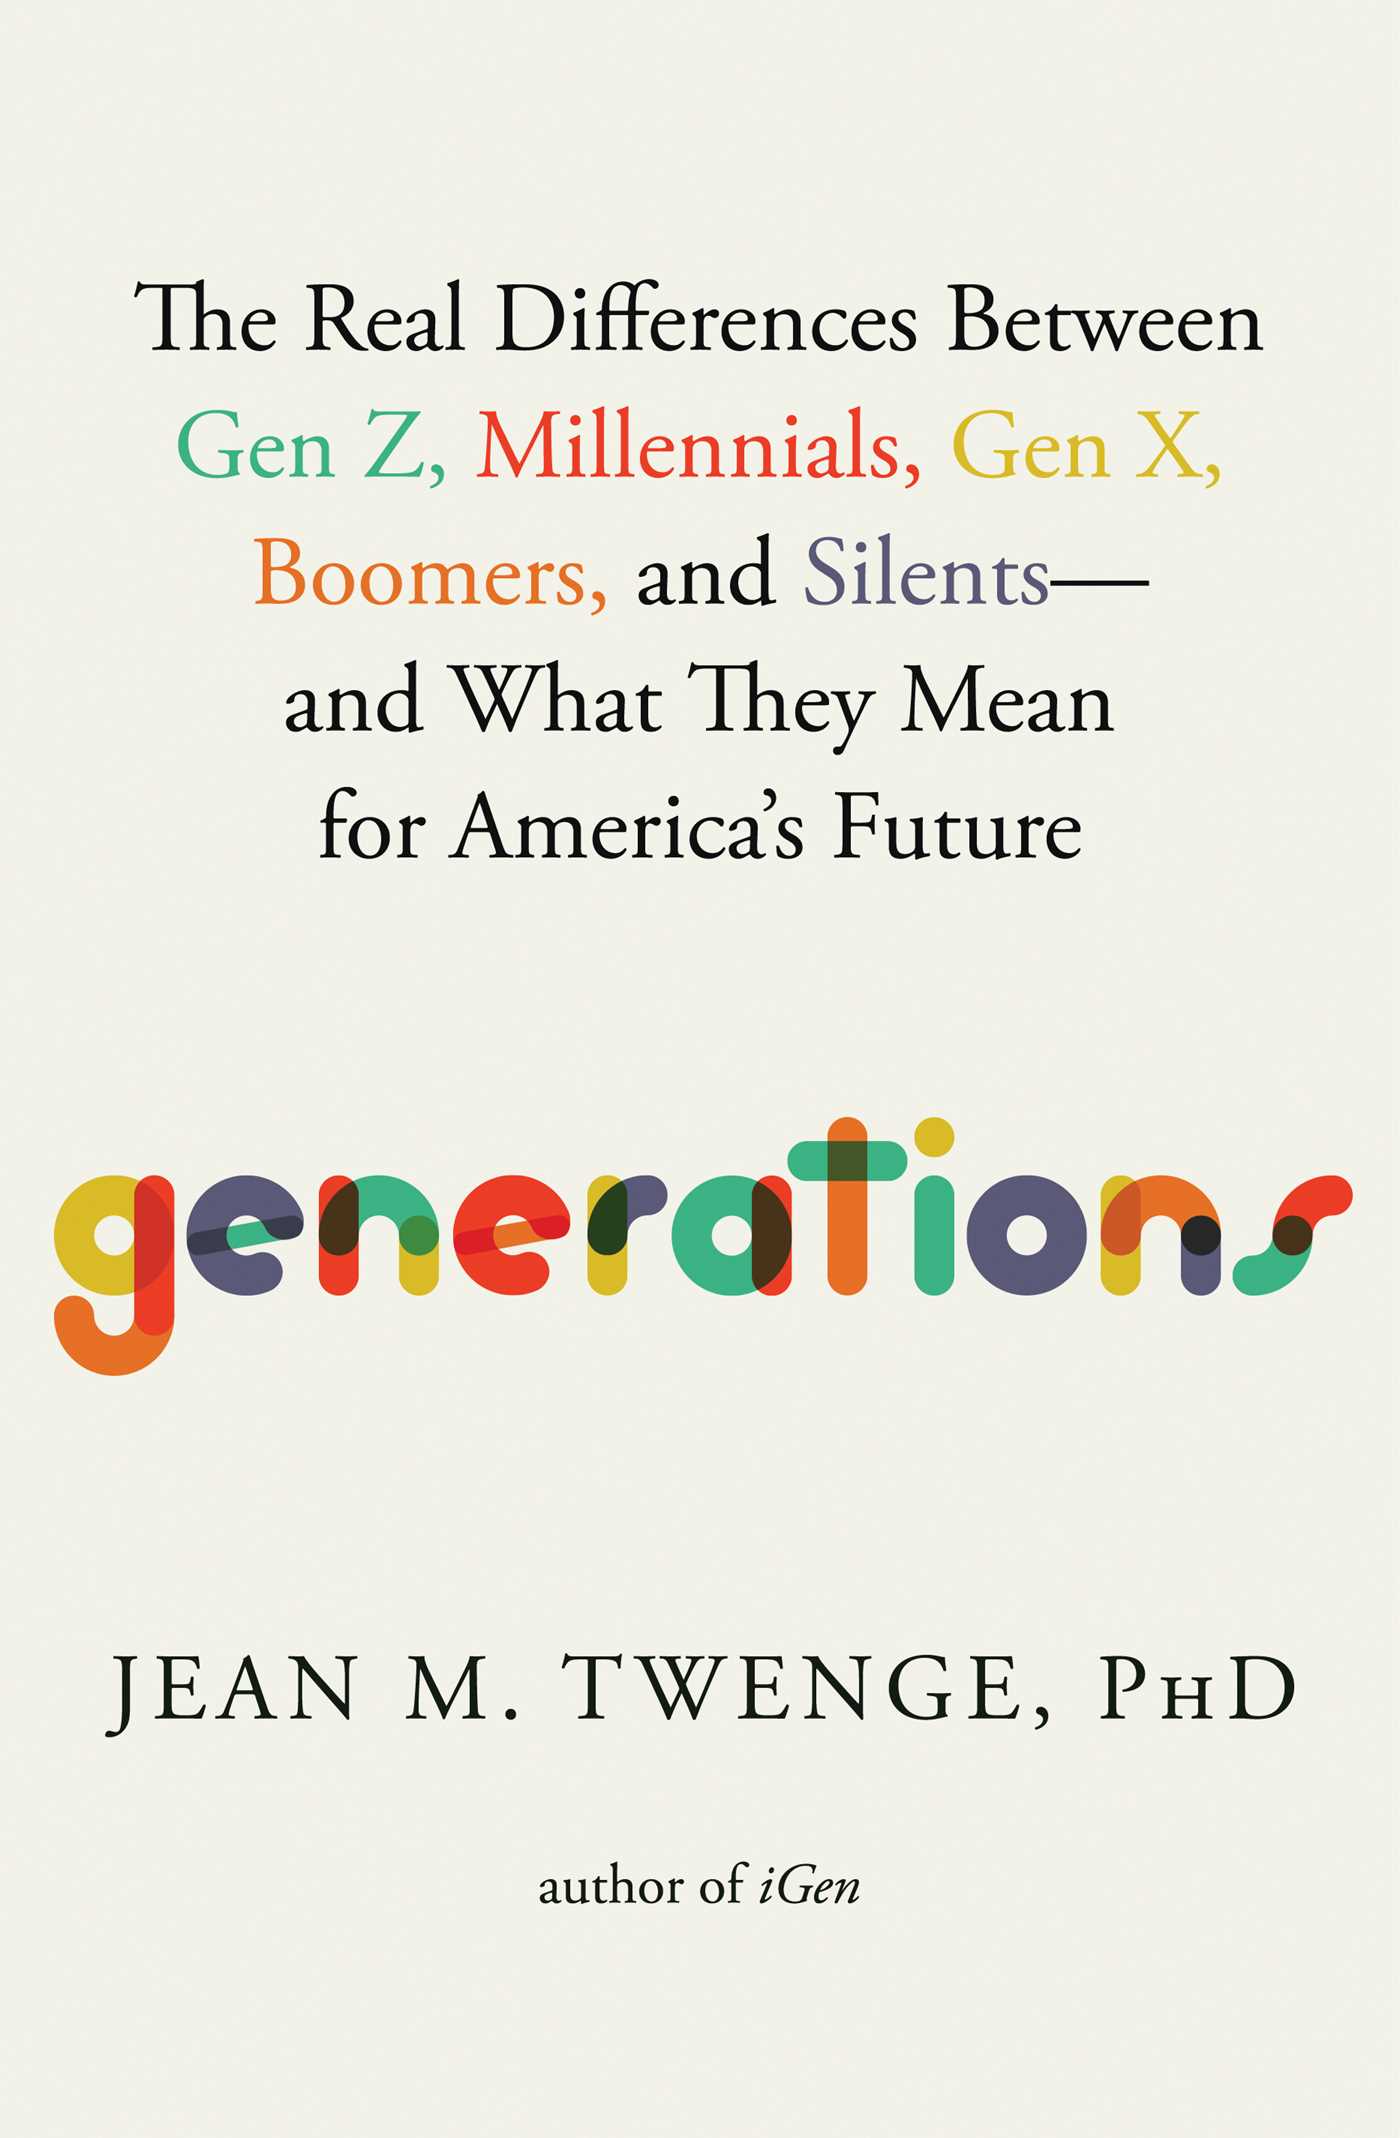 Review: “Generations”